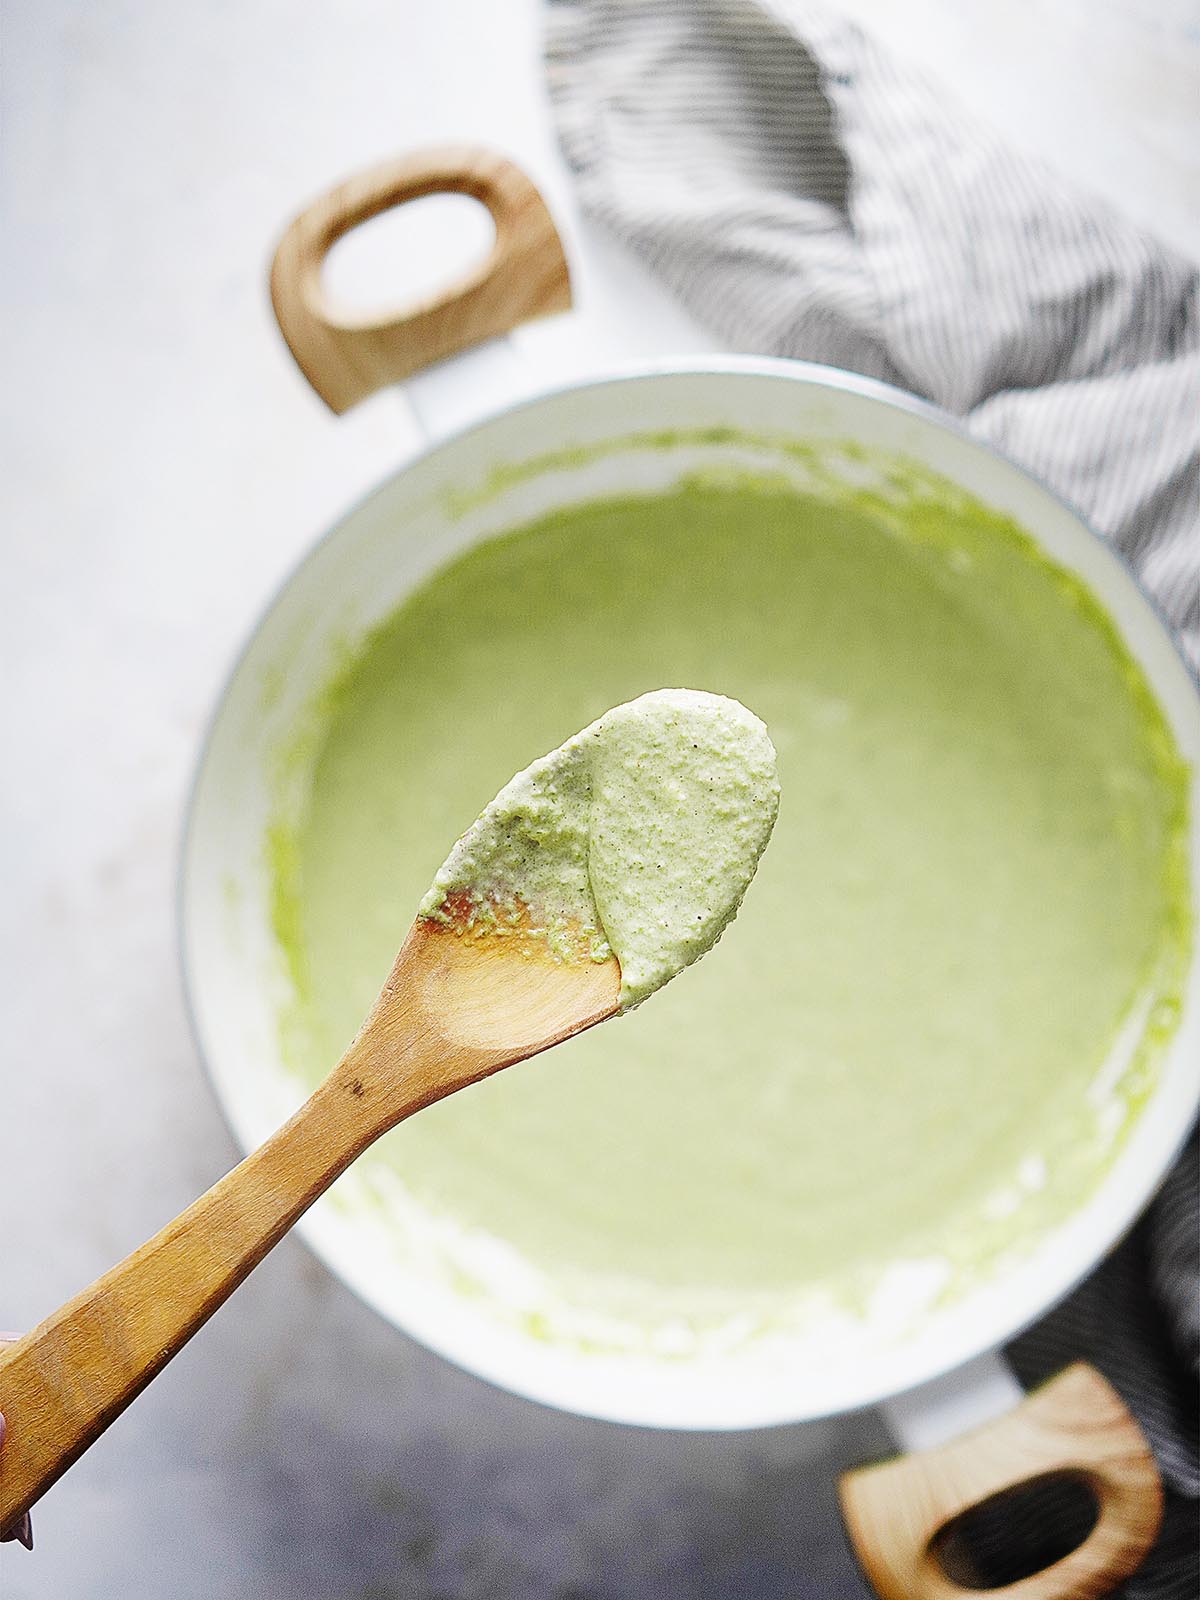 A wooden spoon with a green creamy sauce and a saucepan in the background.